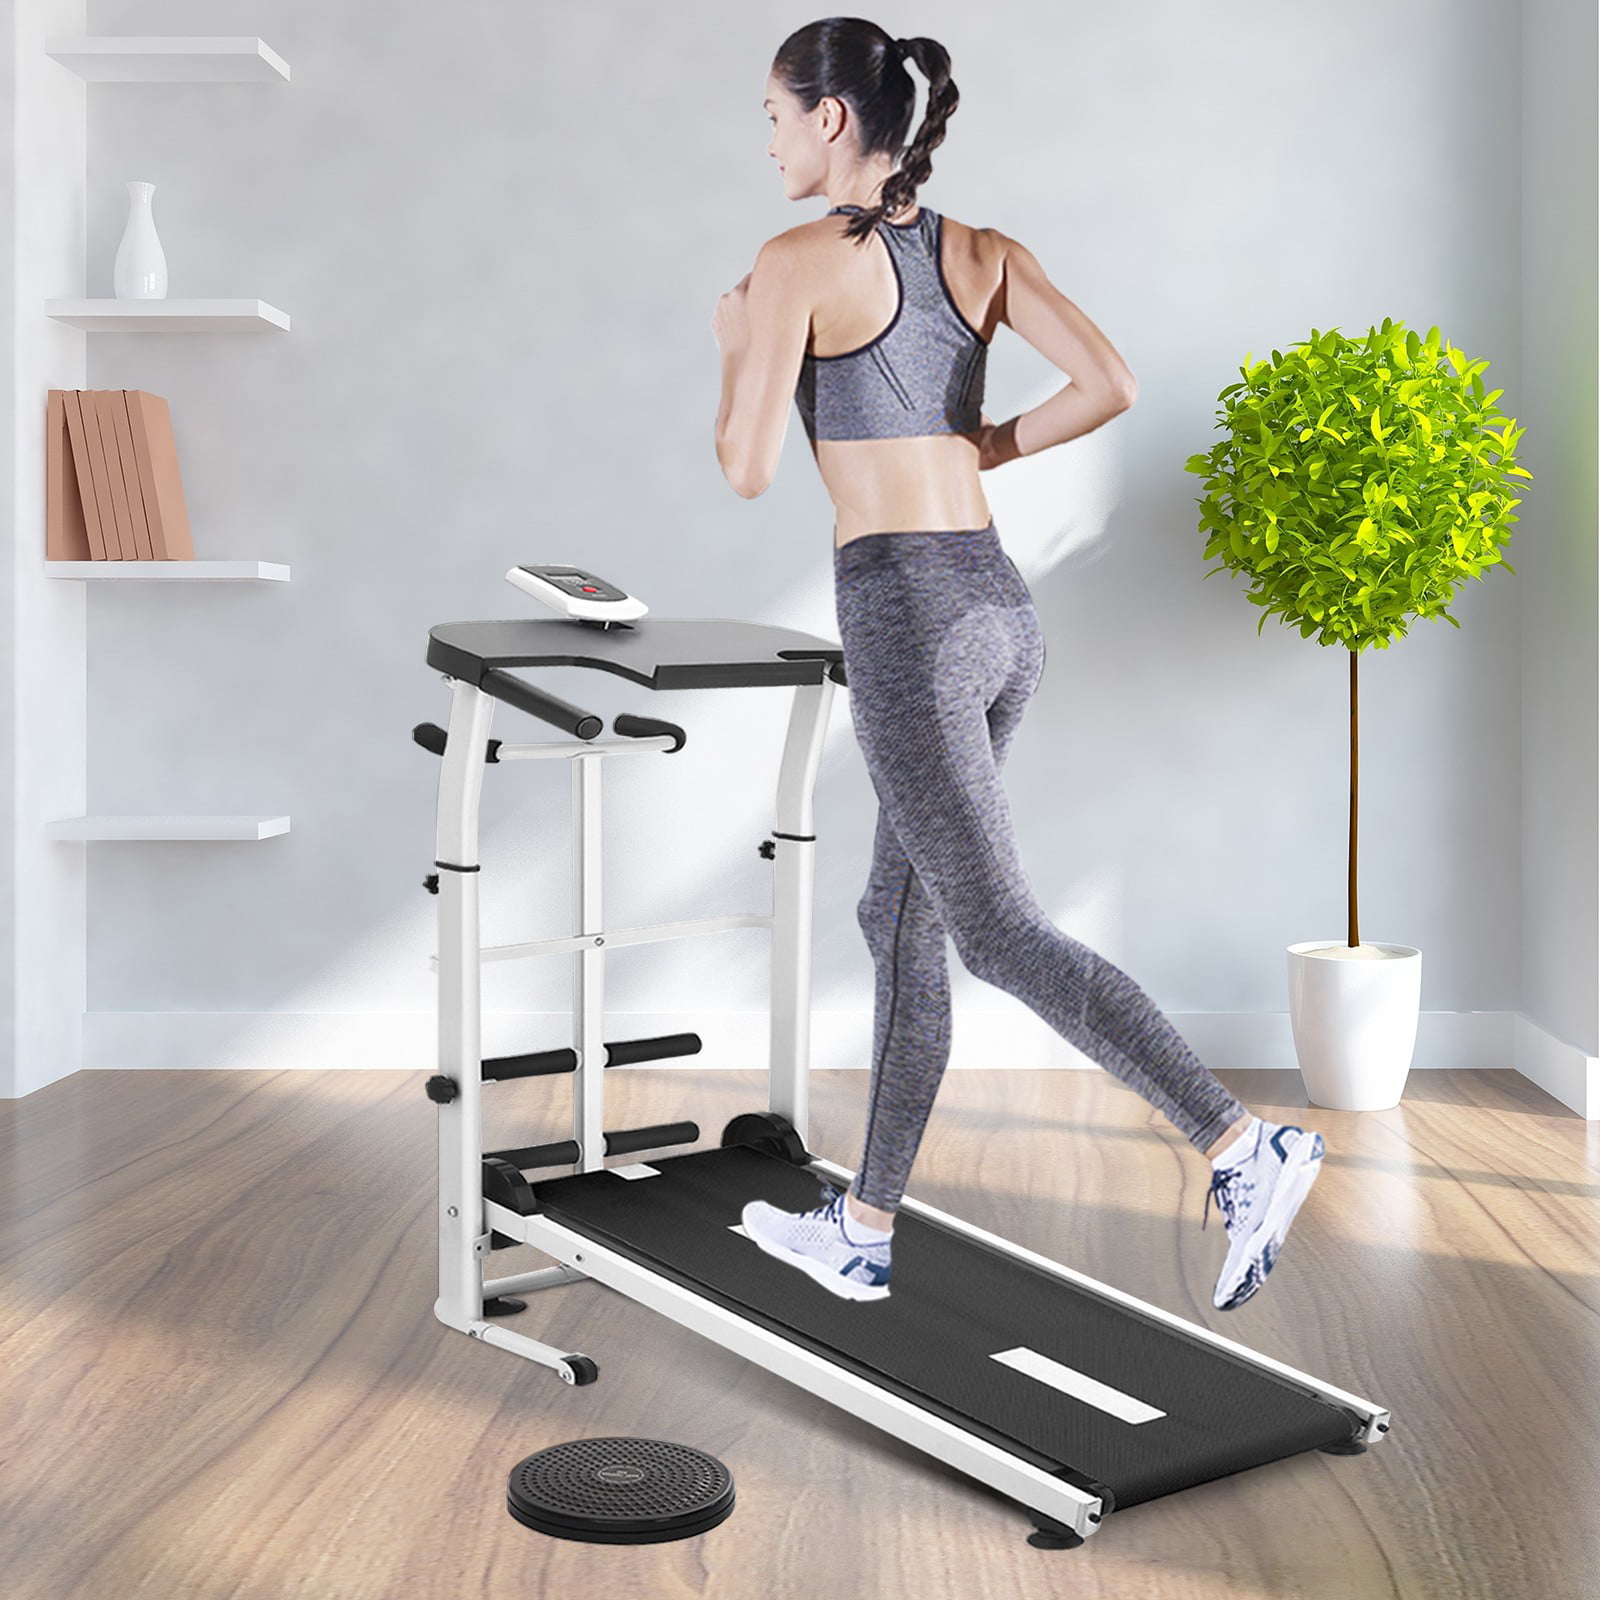 From Overall To Partial Exercise Details about   Three-in-one Multifunctional Walking Machine 